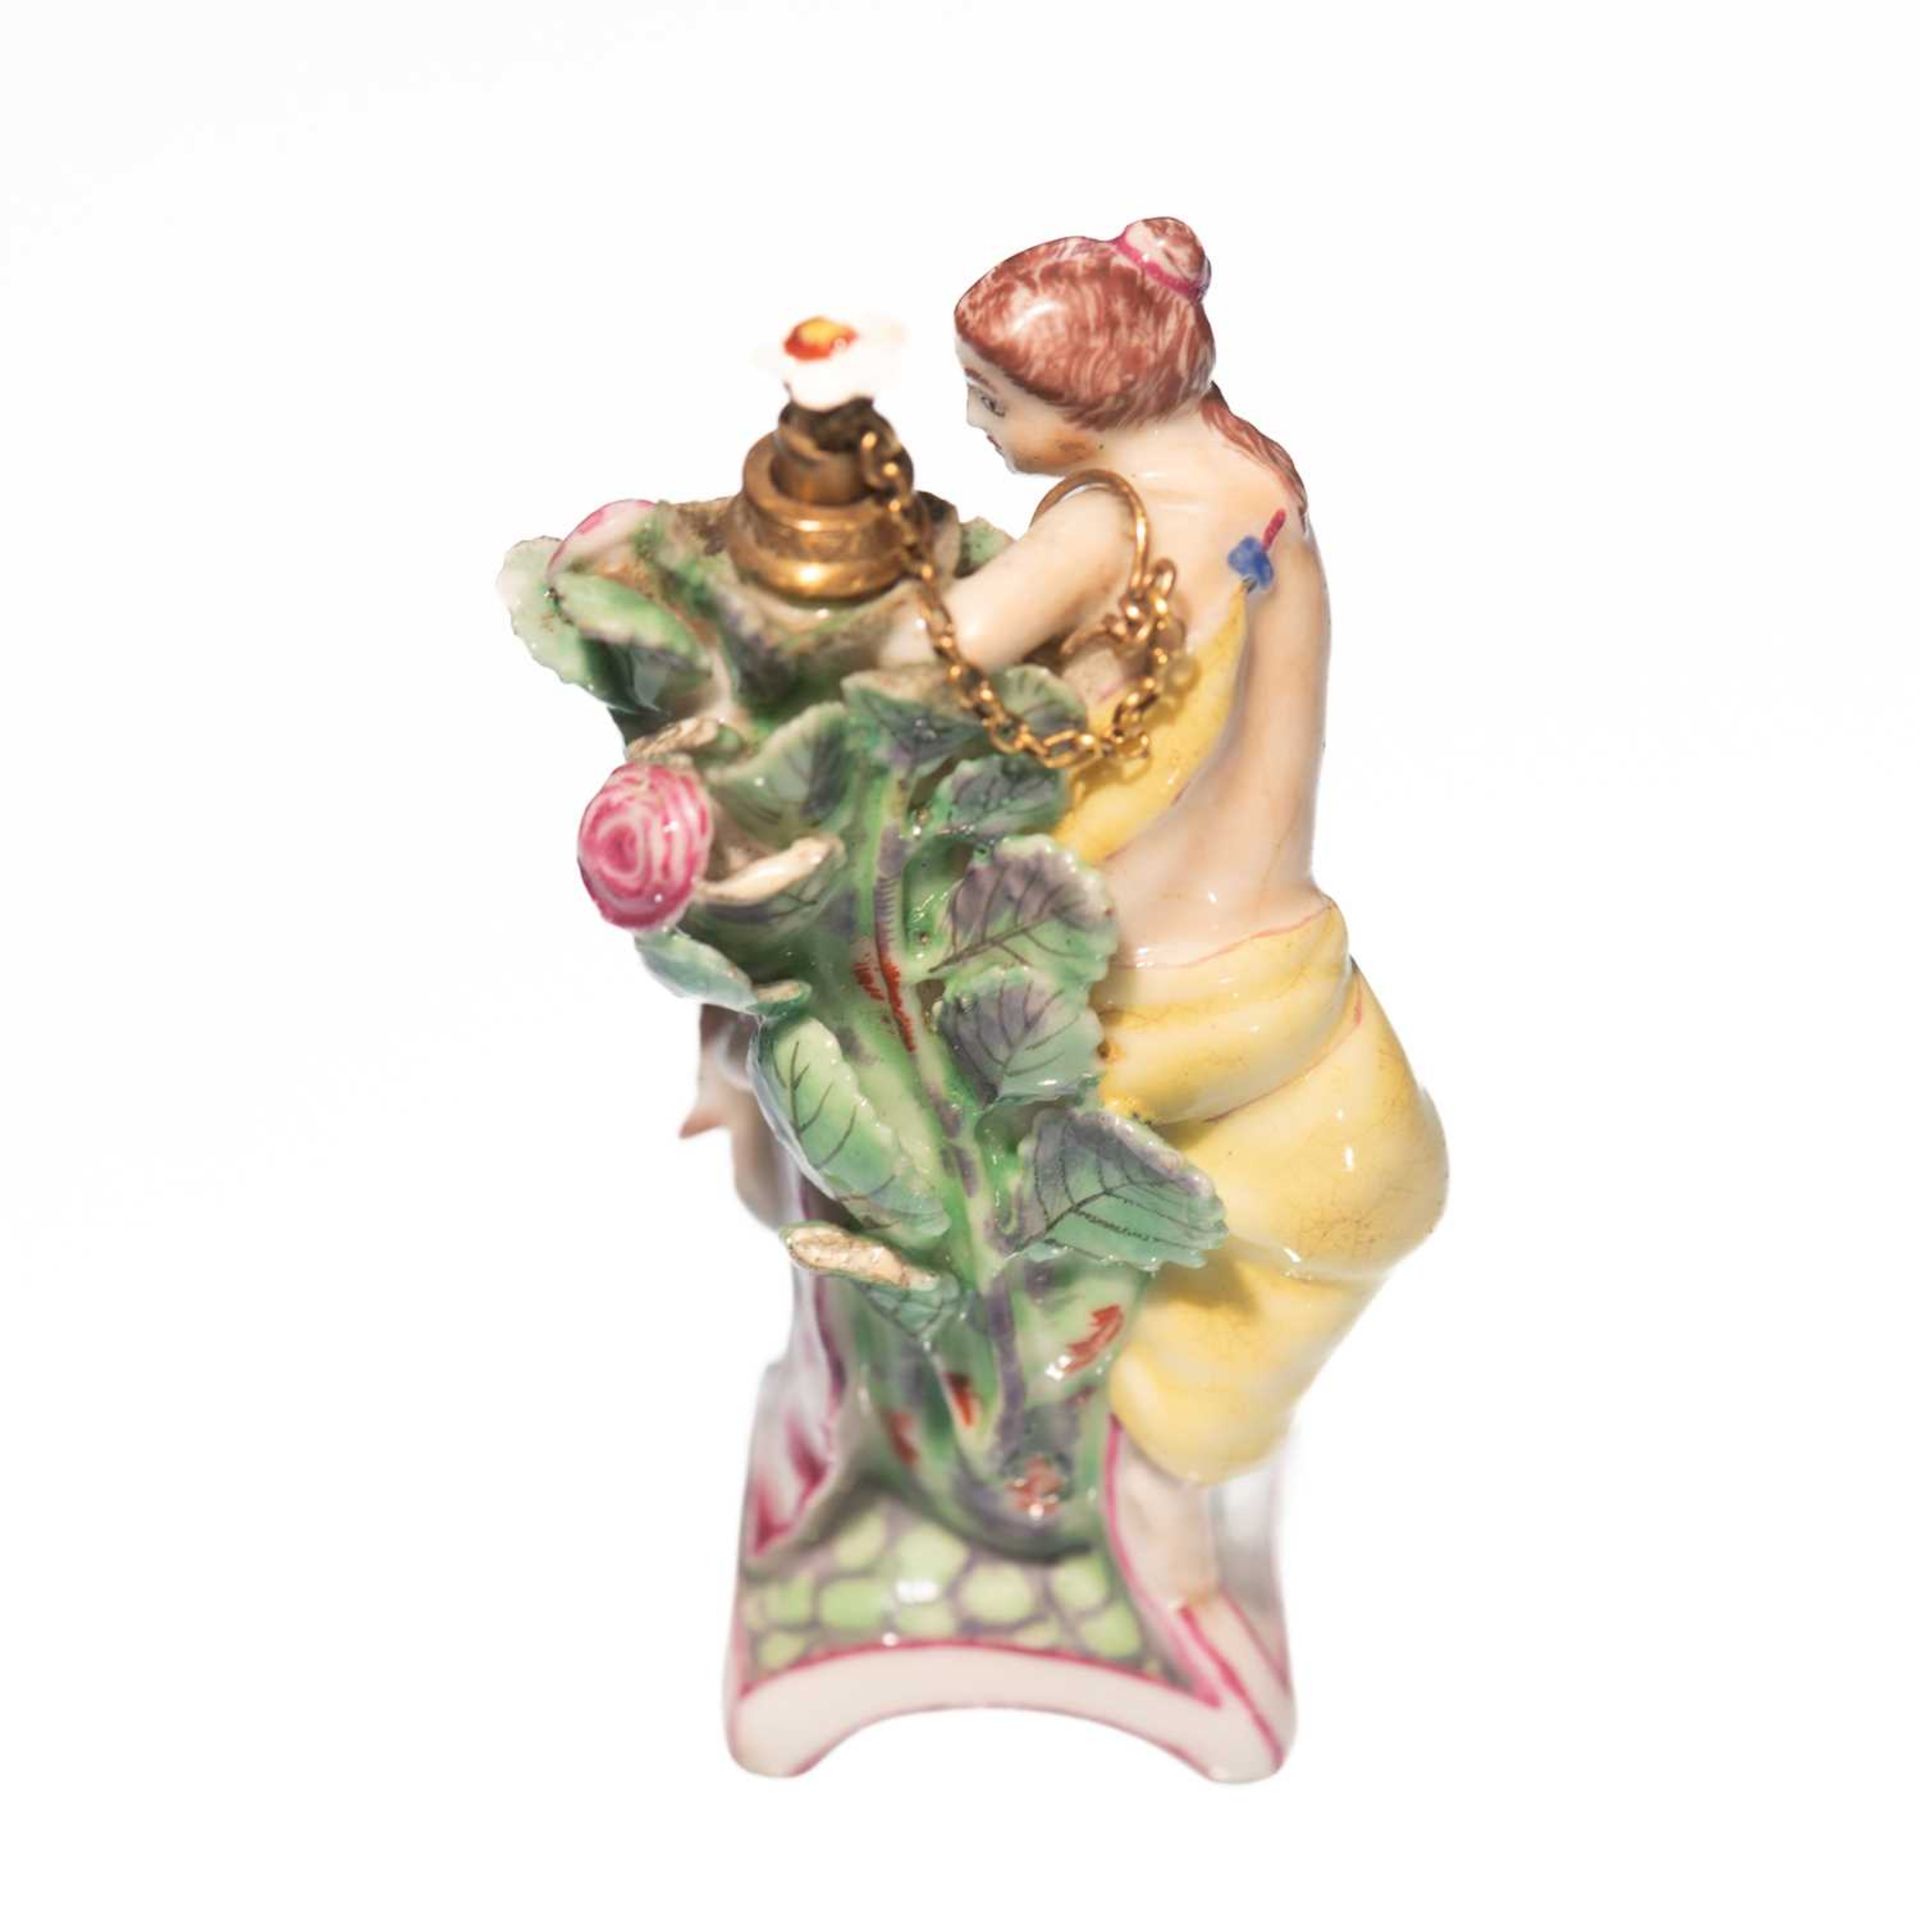 A ST. JAMES'S (CHARLES GOUYN) OR CHELSEA PORCELAIN SCENT BOTTLE AND STOPPER, CIRCA 1755 - Image 2 of 2